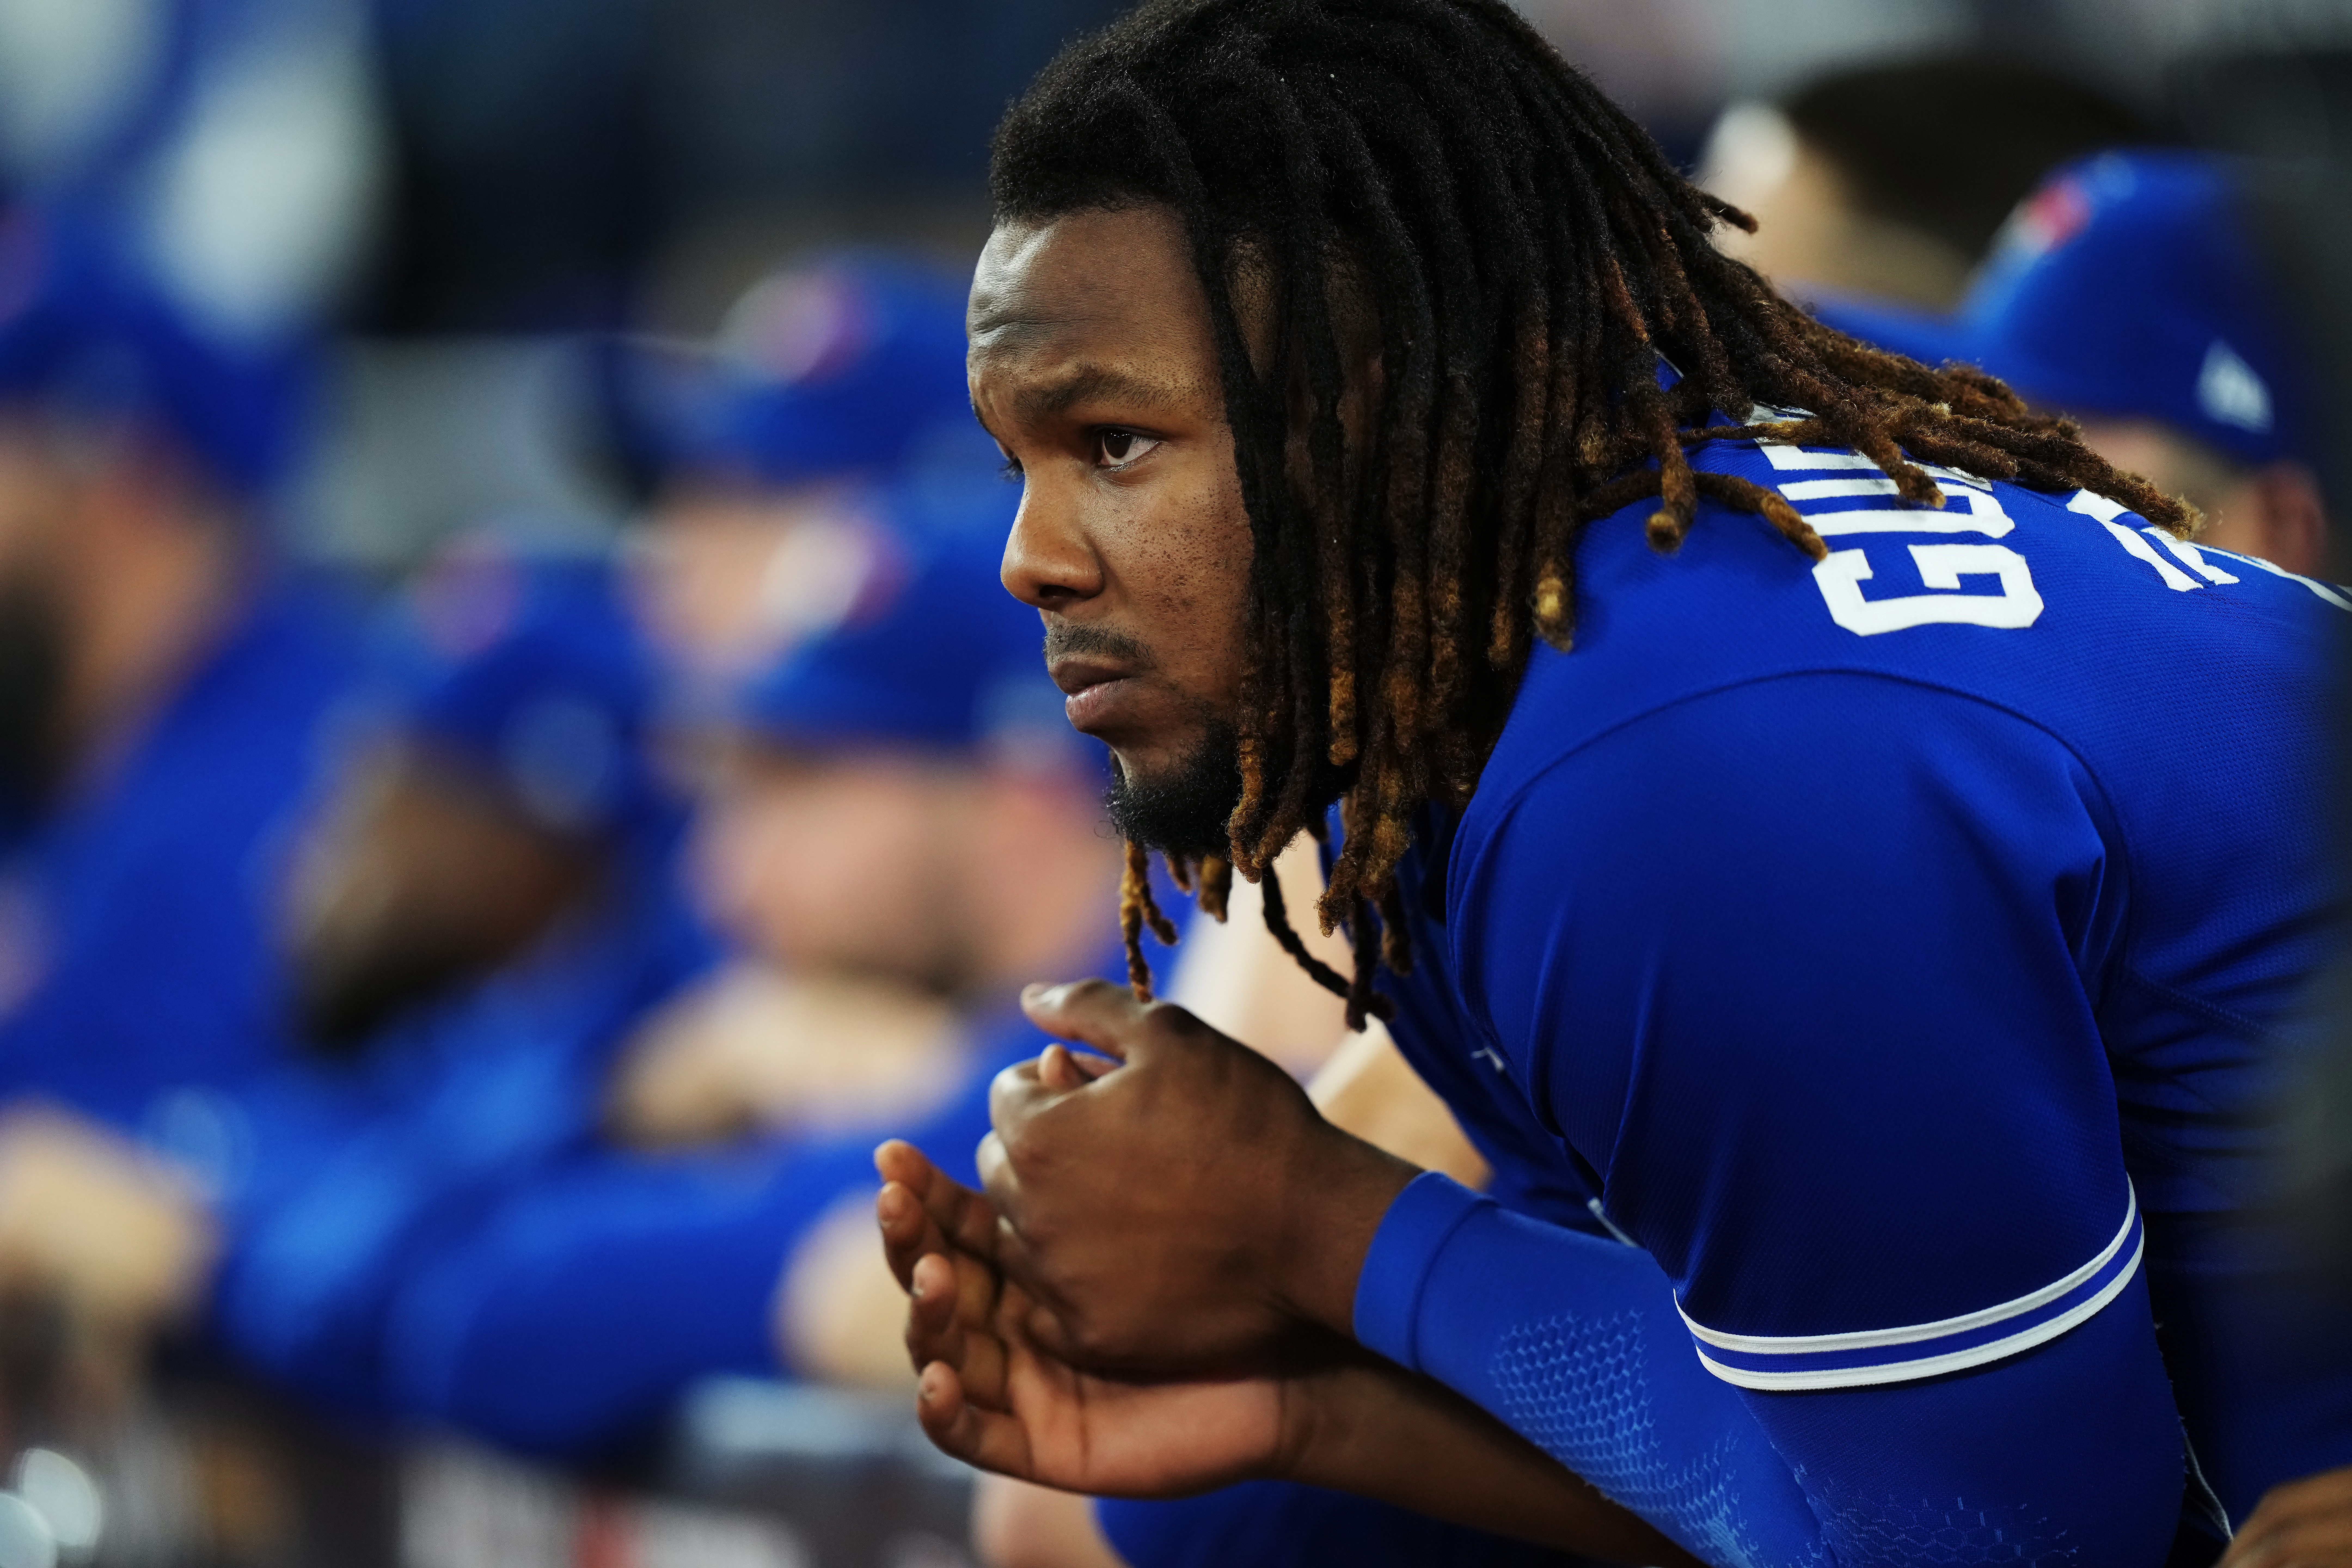 A Letter From Vlad Guerrero to Vlad Jr. 